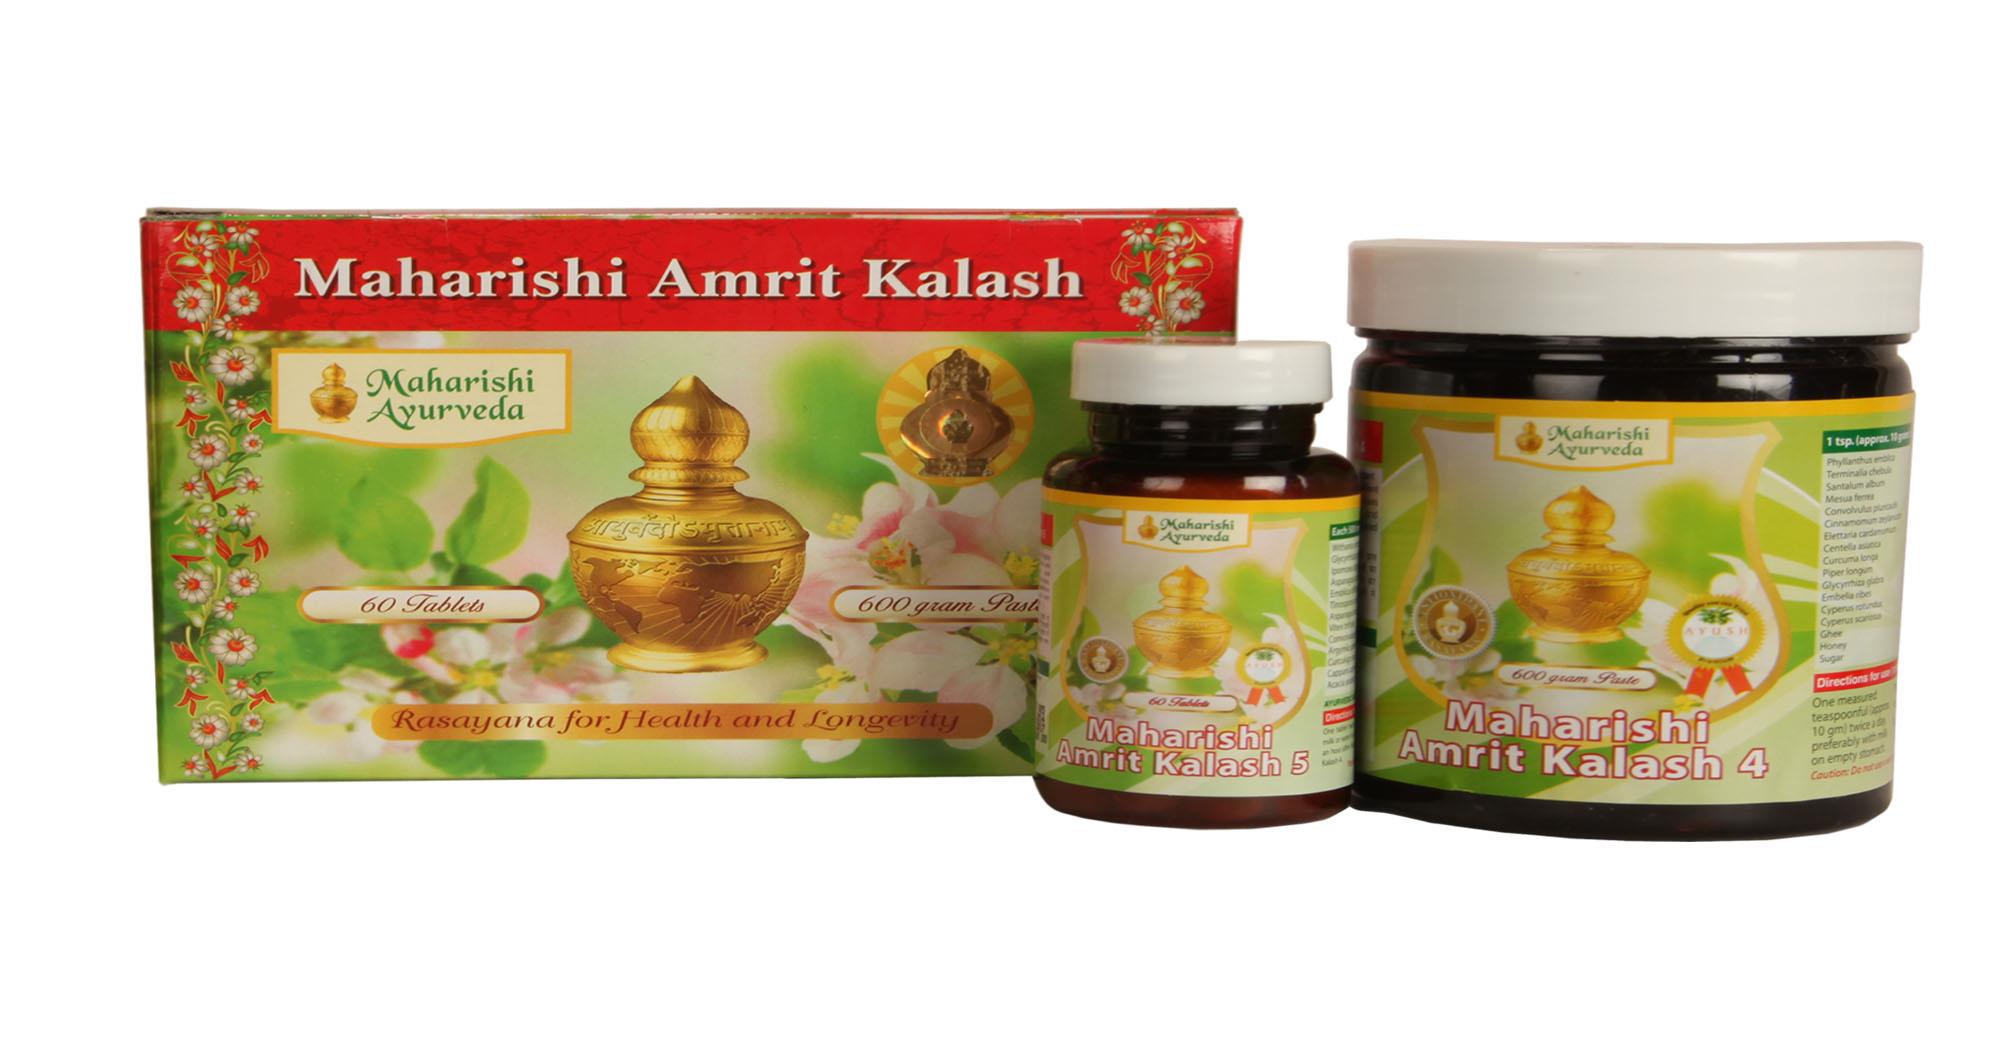 Buy Maharishi Amrit Kalash Dual Pack (Paste and Tablet) at Best Price Online